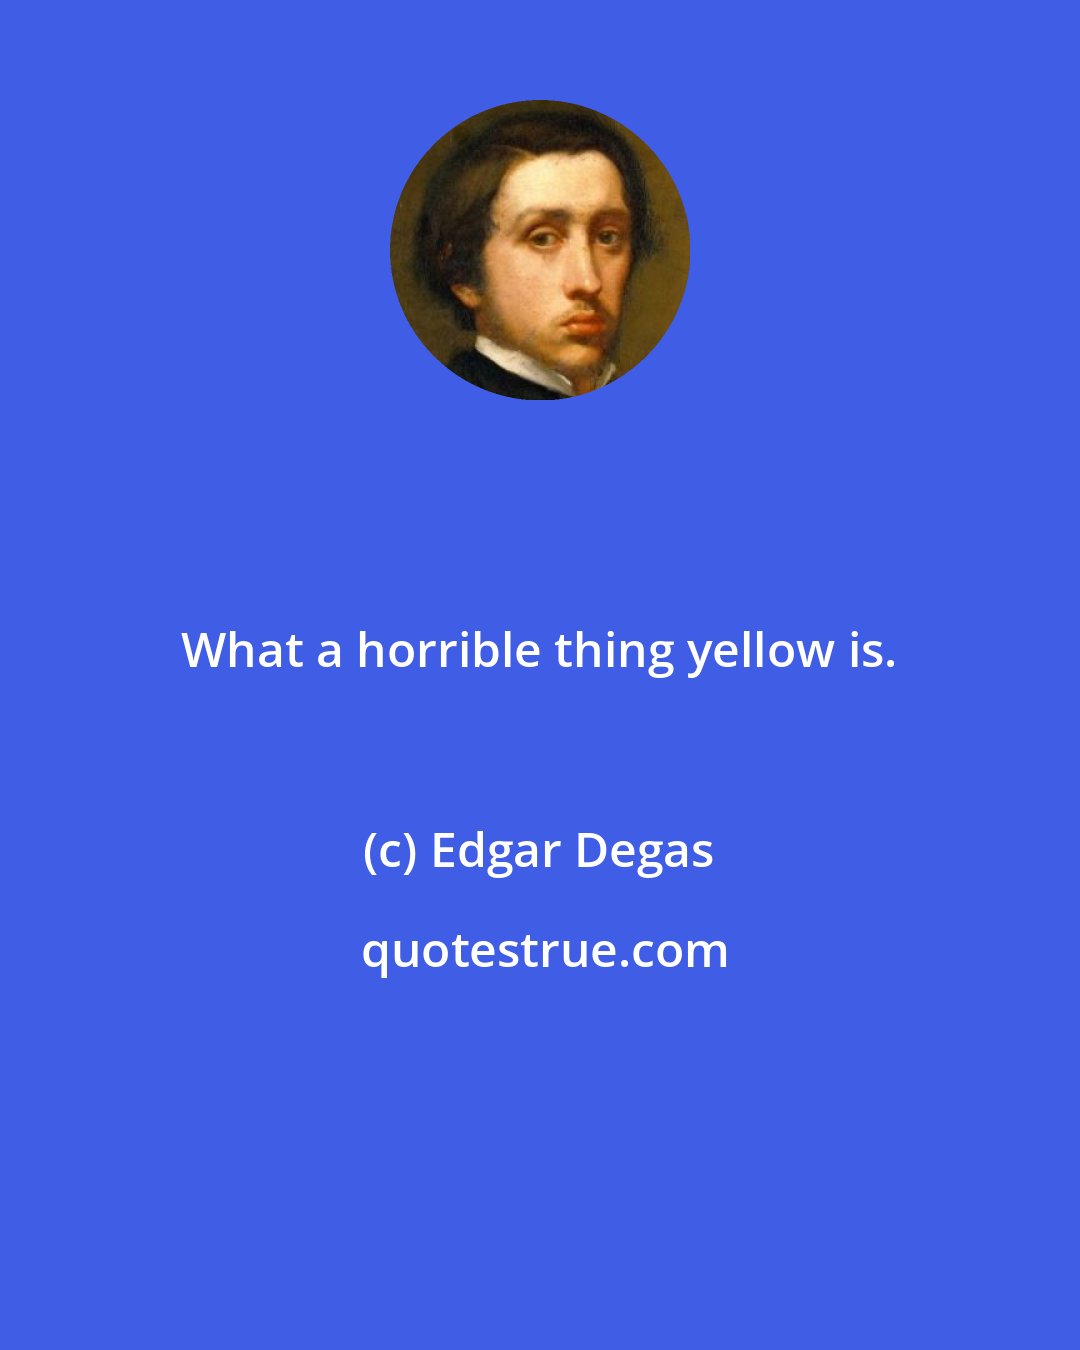 Edgar Degas: What a horrible thing yellow is.